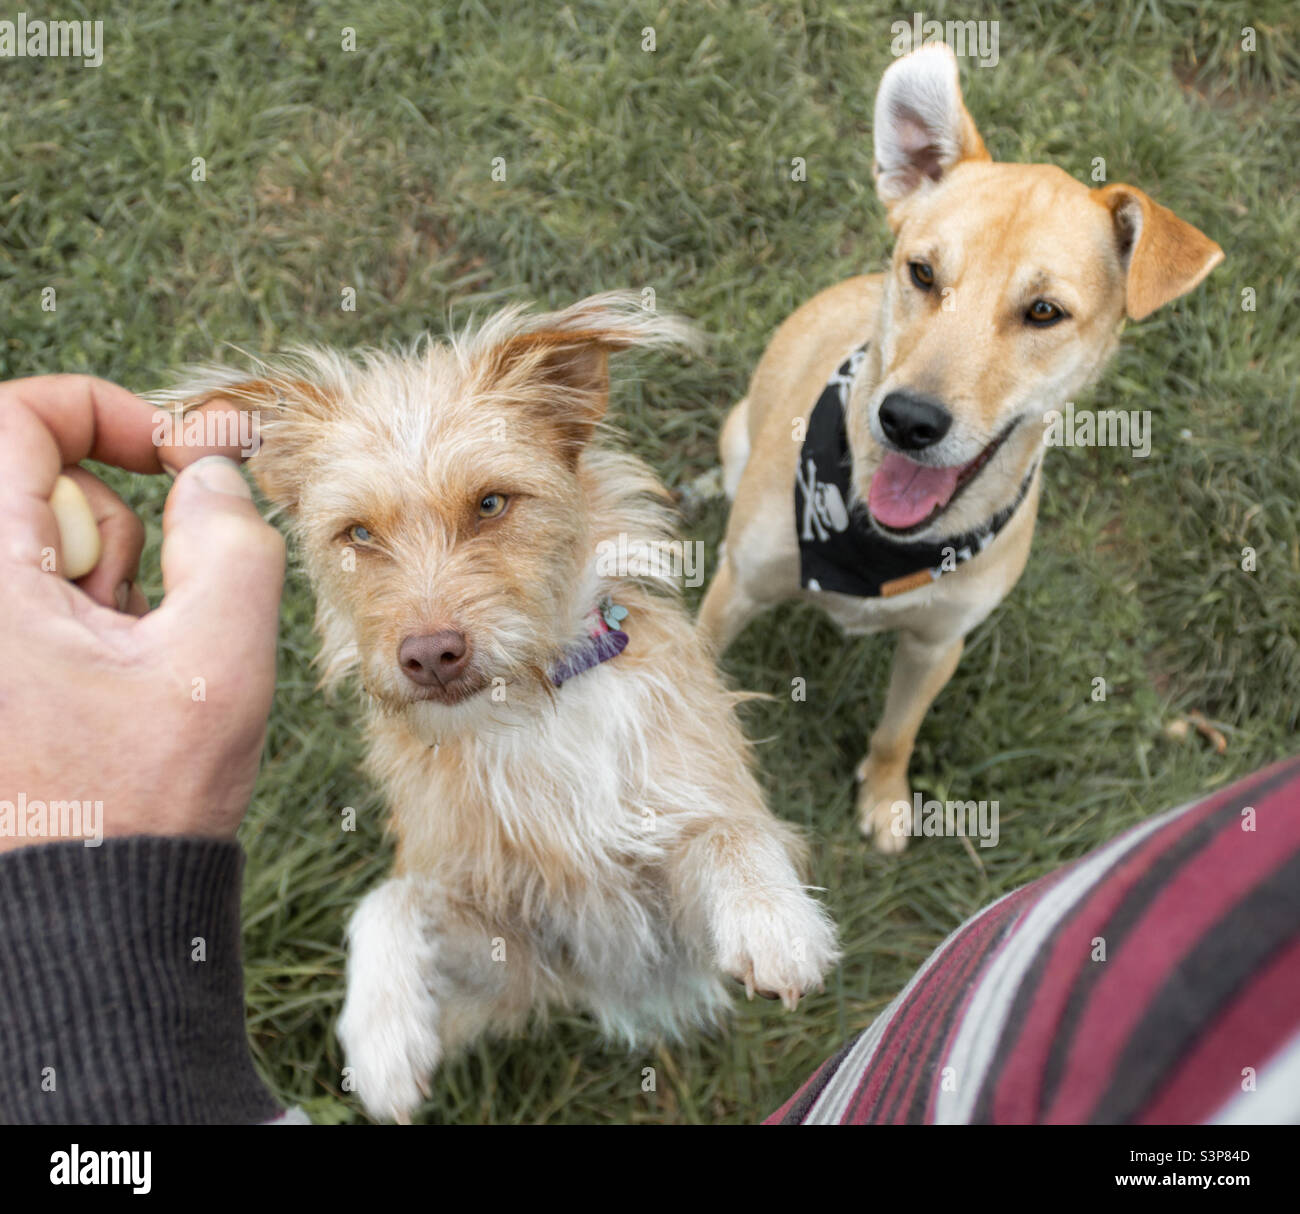 2 dogs eye up the treats in their owner’s hand and one leaps up to get one Stock Photo